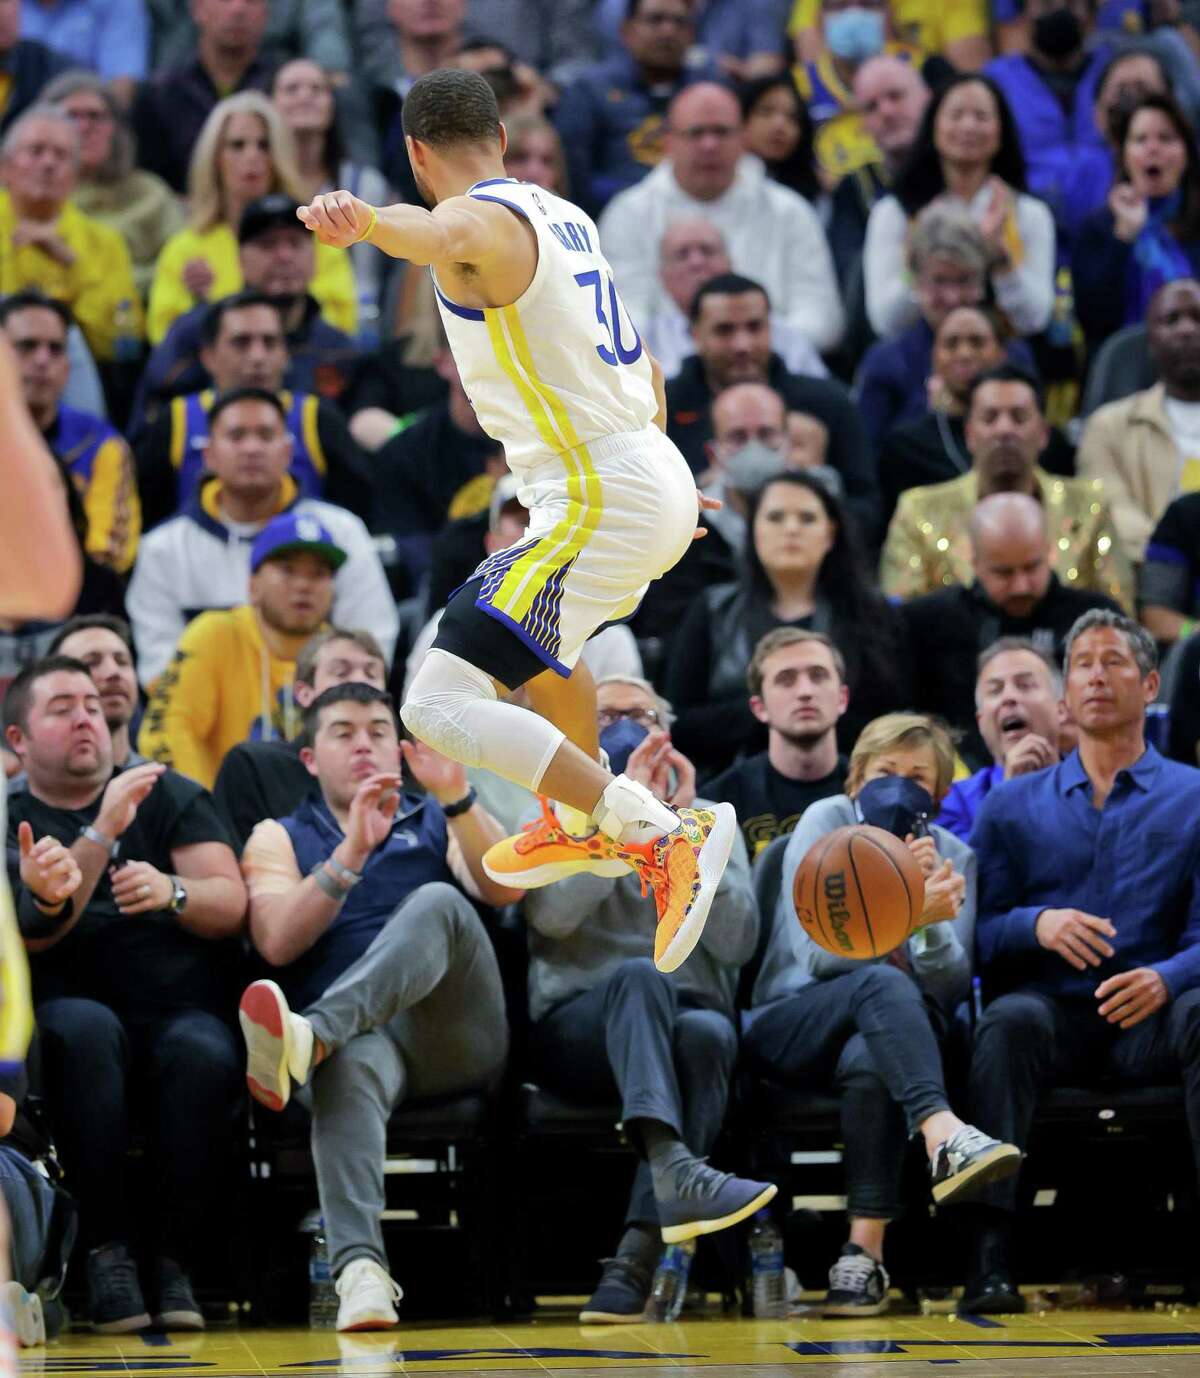 Stephen Curry (30) tries to stop a ball before it goes out of bounds in the first half as the Golden State Warriors played the Memphis Grizzlies in Game 4 of the Western Conference Semifinals of the NBA Playoffs at Chase Center, in San Francisco, Calif., on Monday, May 9, 2022.